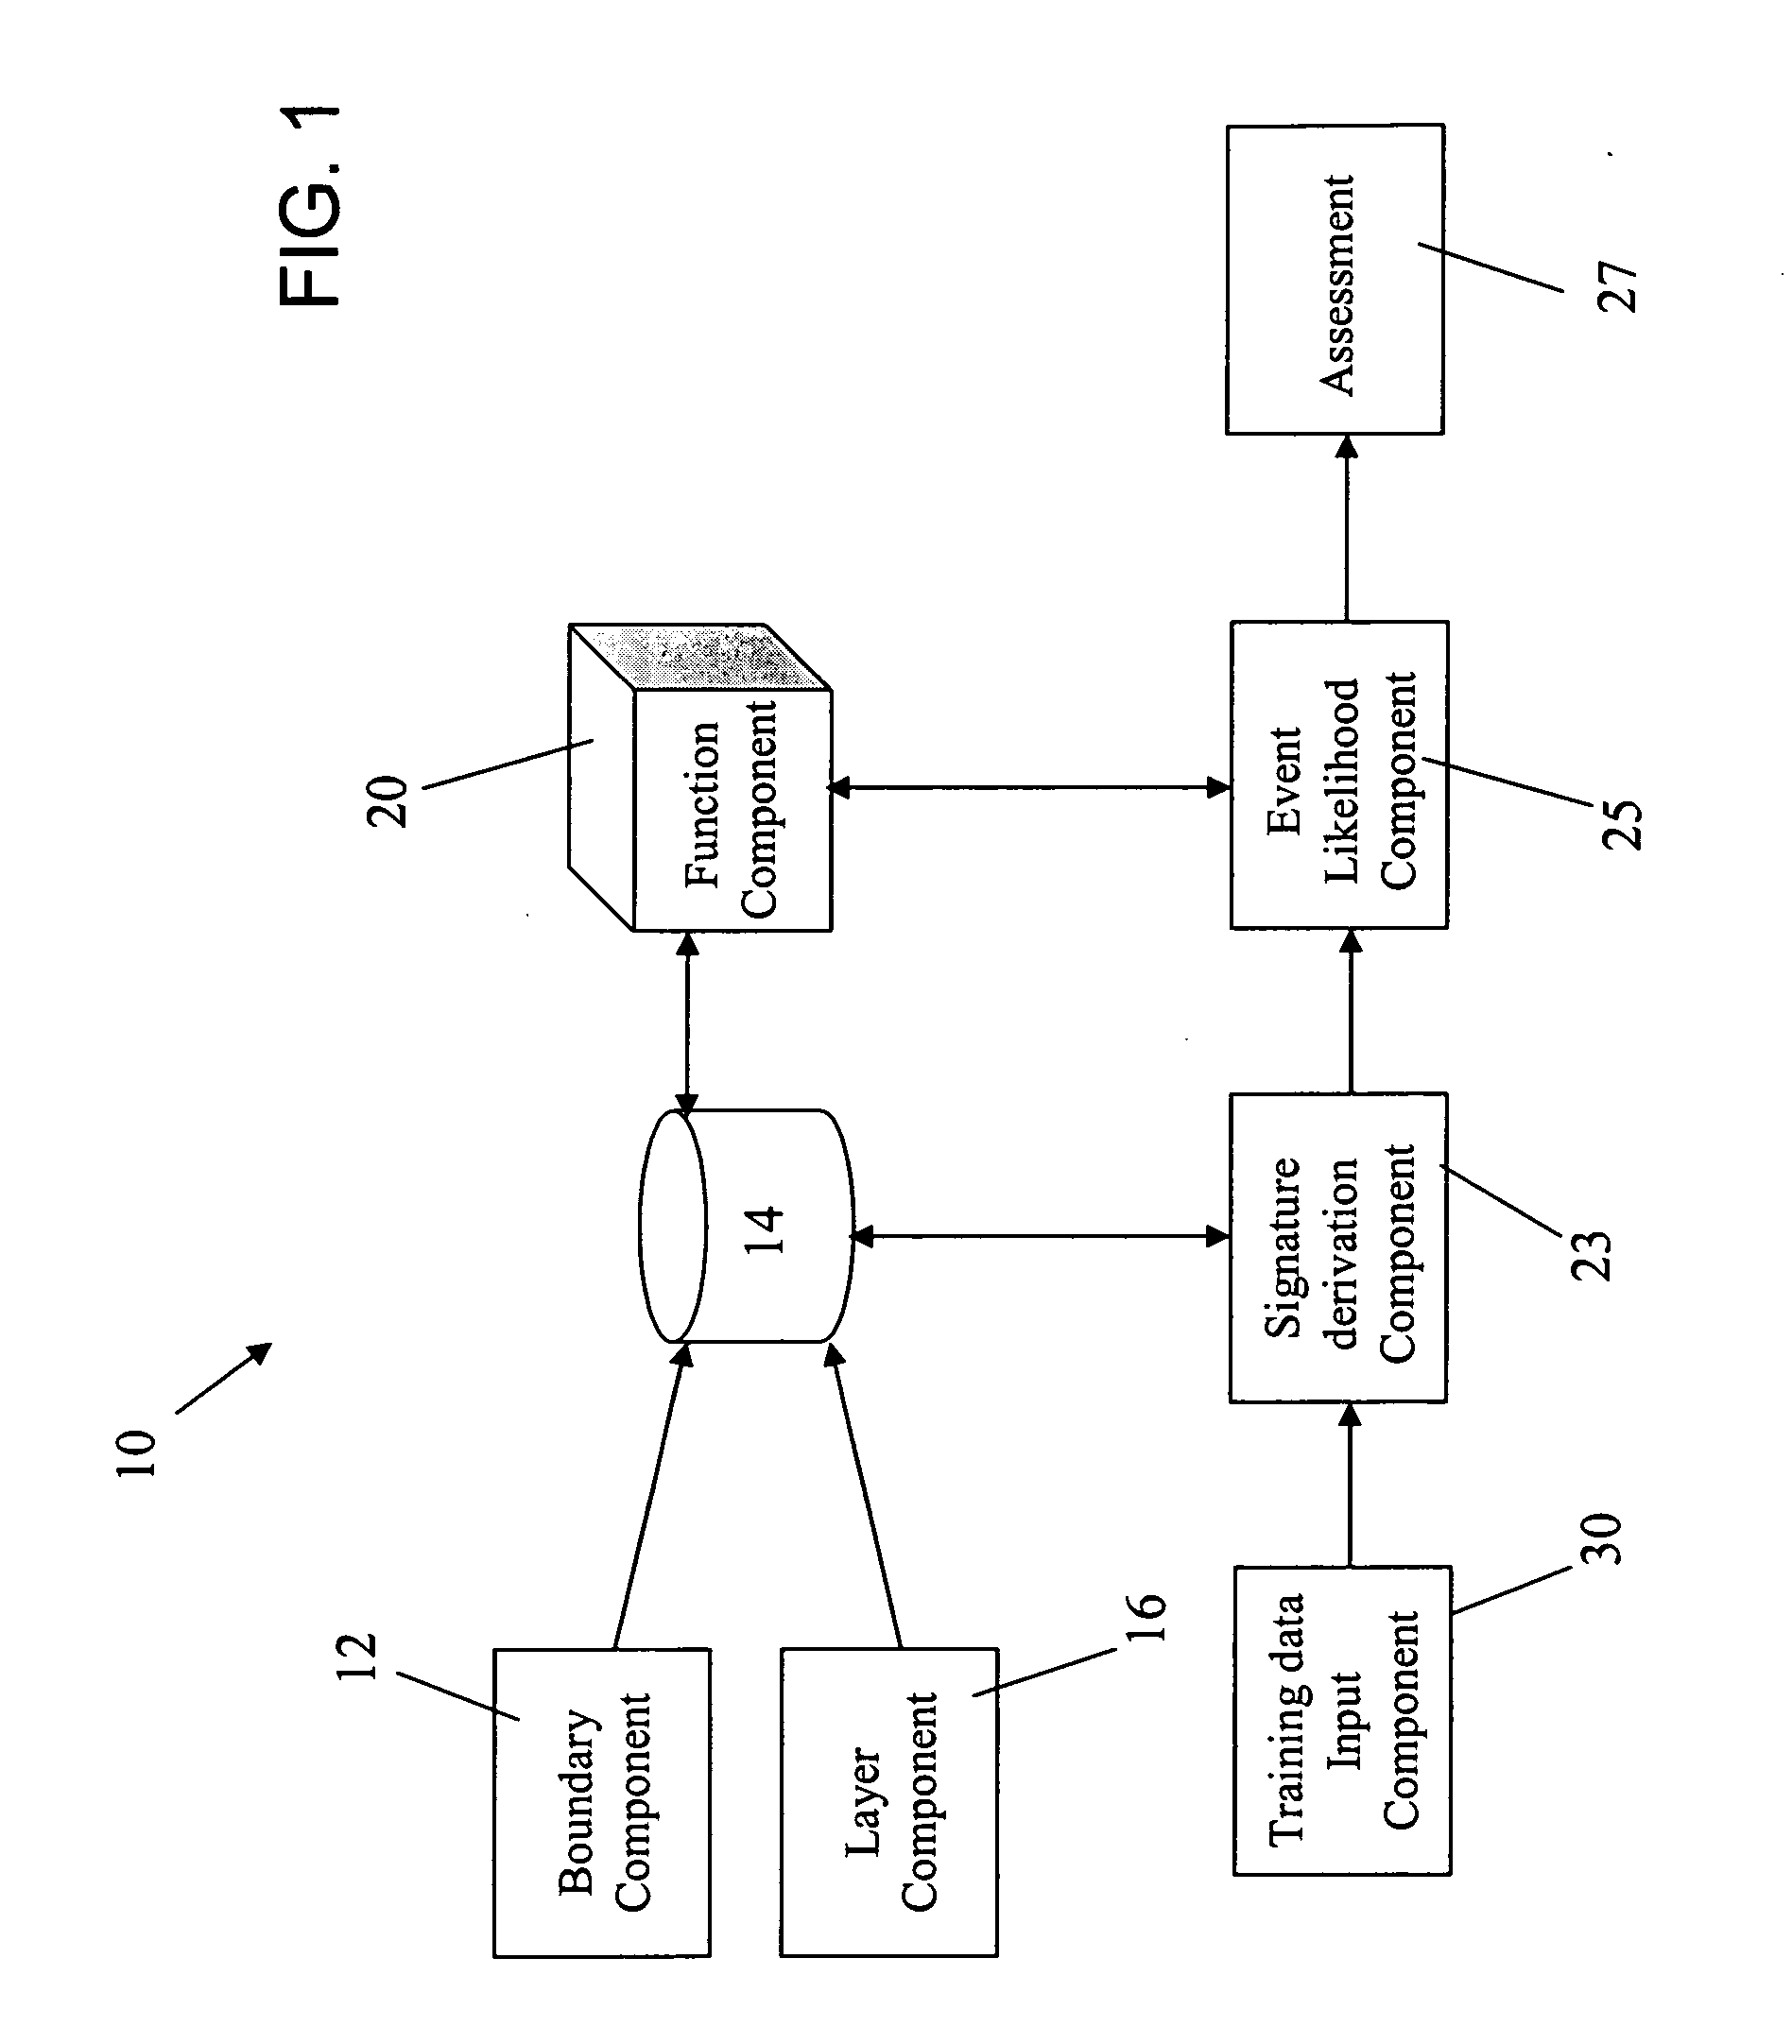 Method and system for forecasting events and results based on geospatial modeling